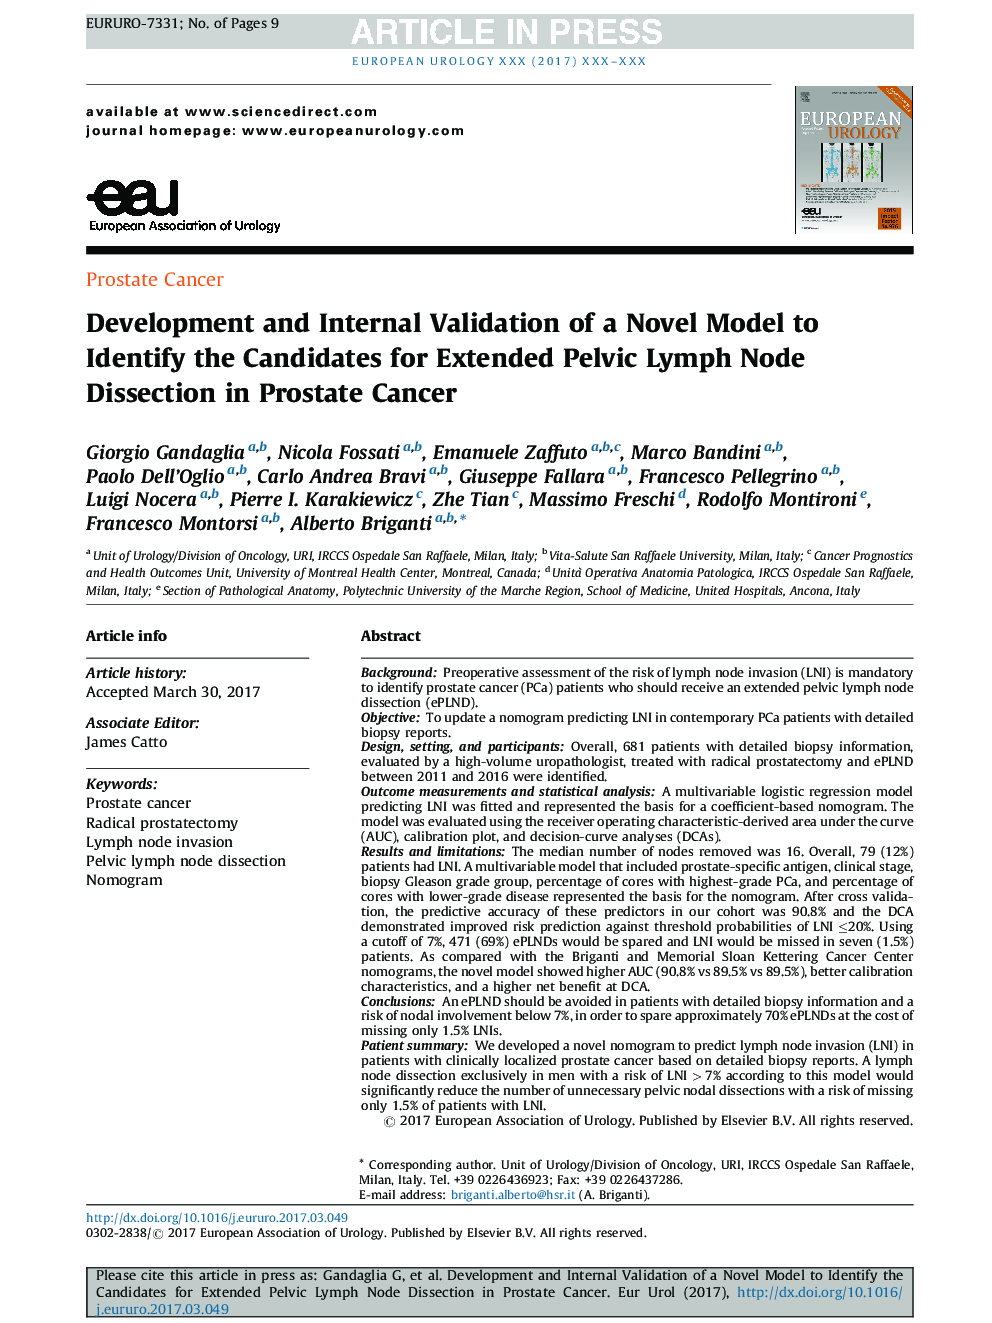 Development and Internal Validation of a Novel Model to Identify the Candidates for Extended Pelvic Lymph Node Dissection in Prostate Cancer